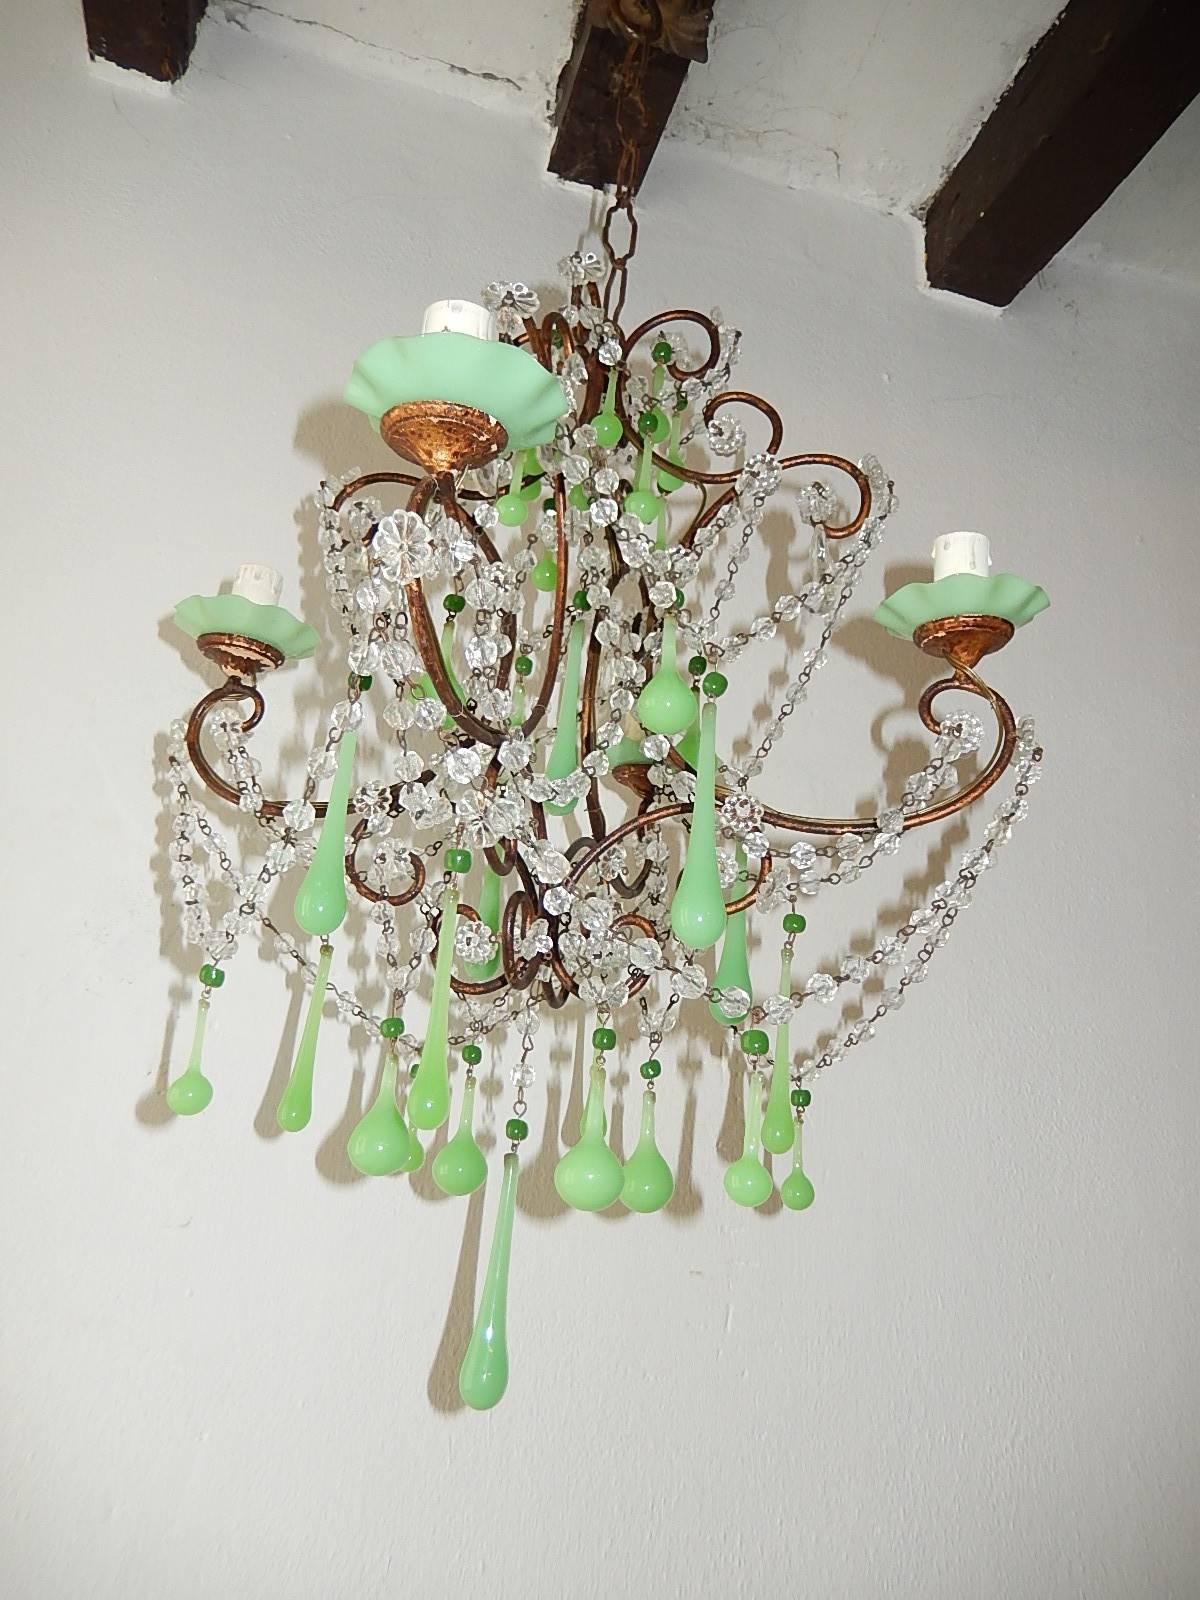 Housing four lights sitting in rare green ruffle opaline bobeches on top of chippy giltwood posts. Rewired and ready to hang. Swags of crystal balls and florets throughout. Murano green opaline drops and beads throughout. Free priority shipping from